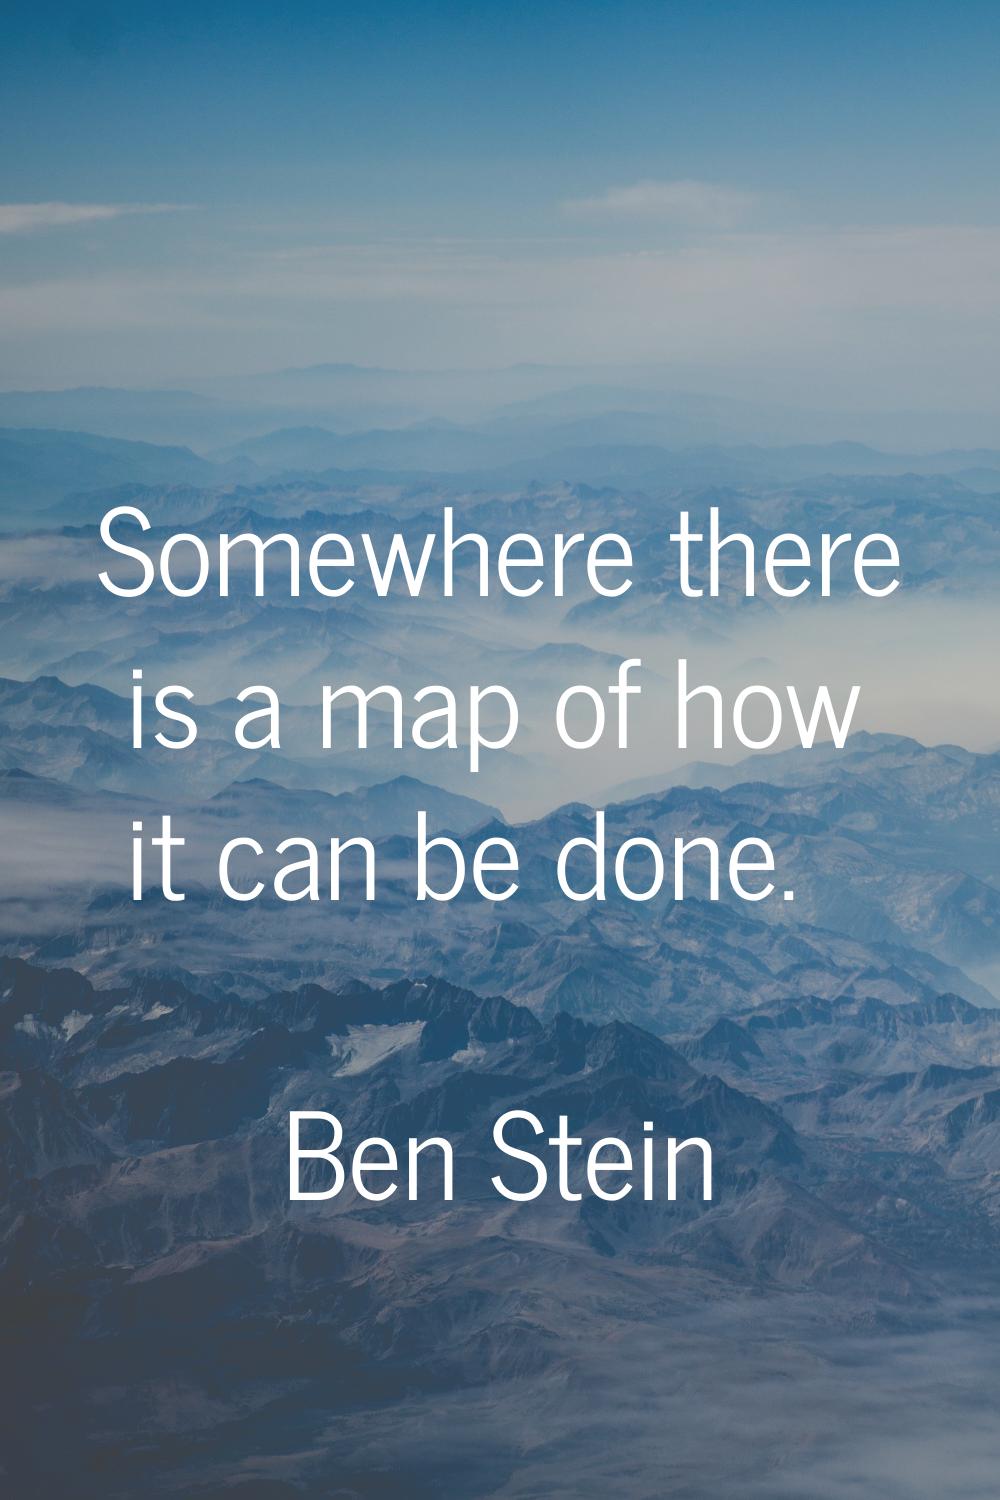 Somewhere there is a map of how it can be done.